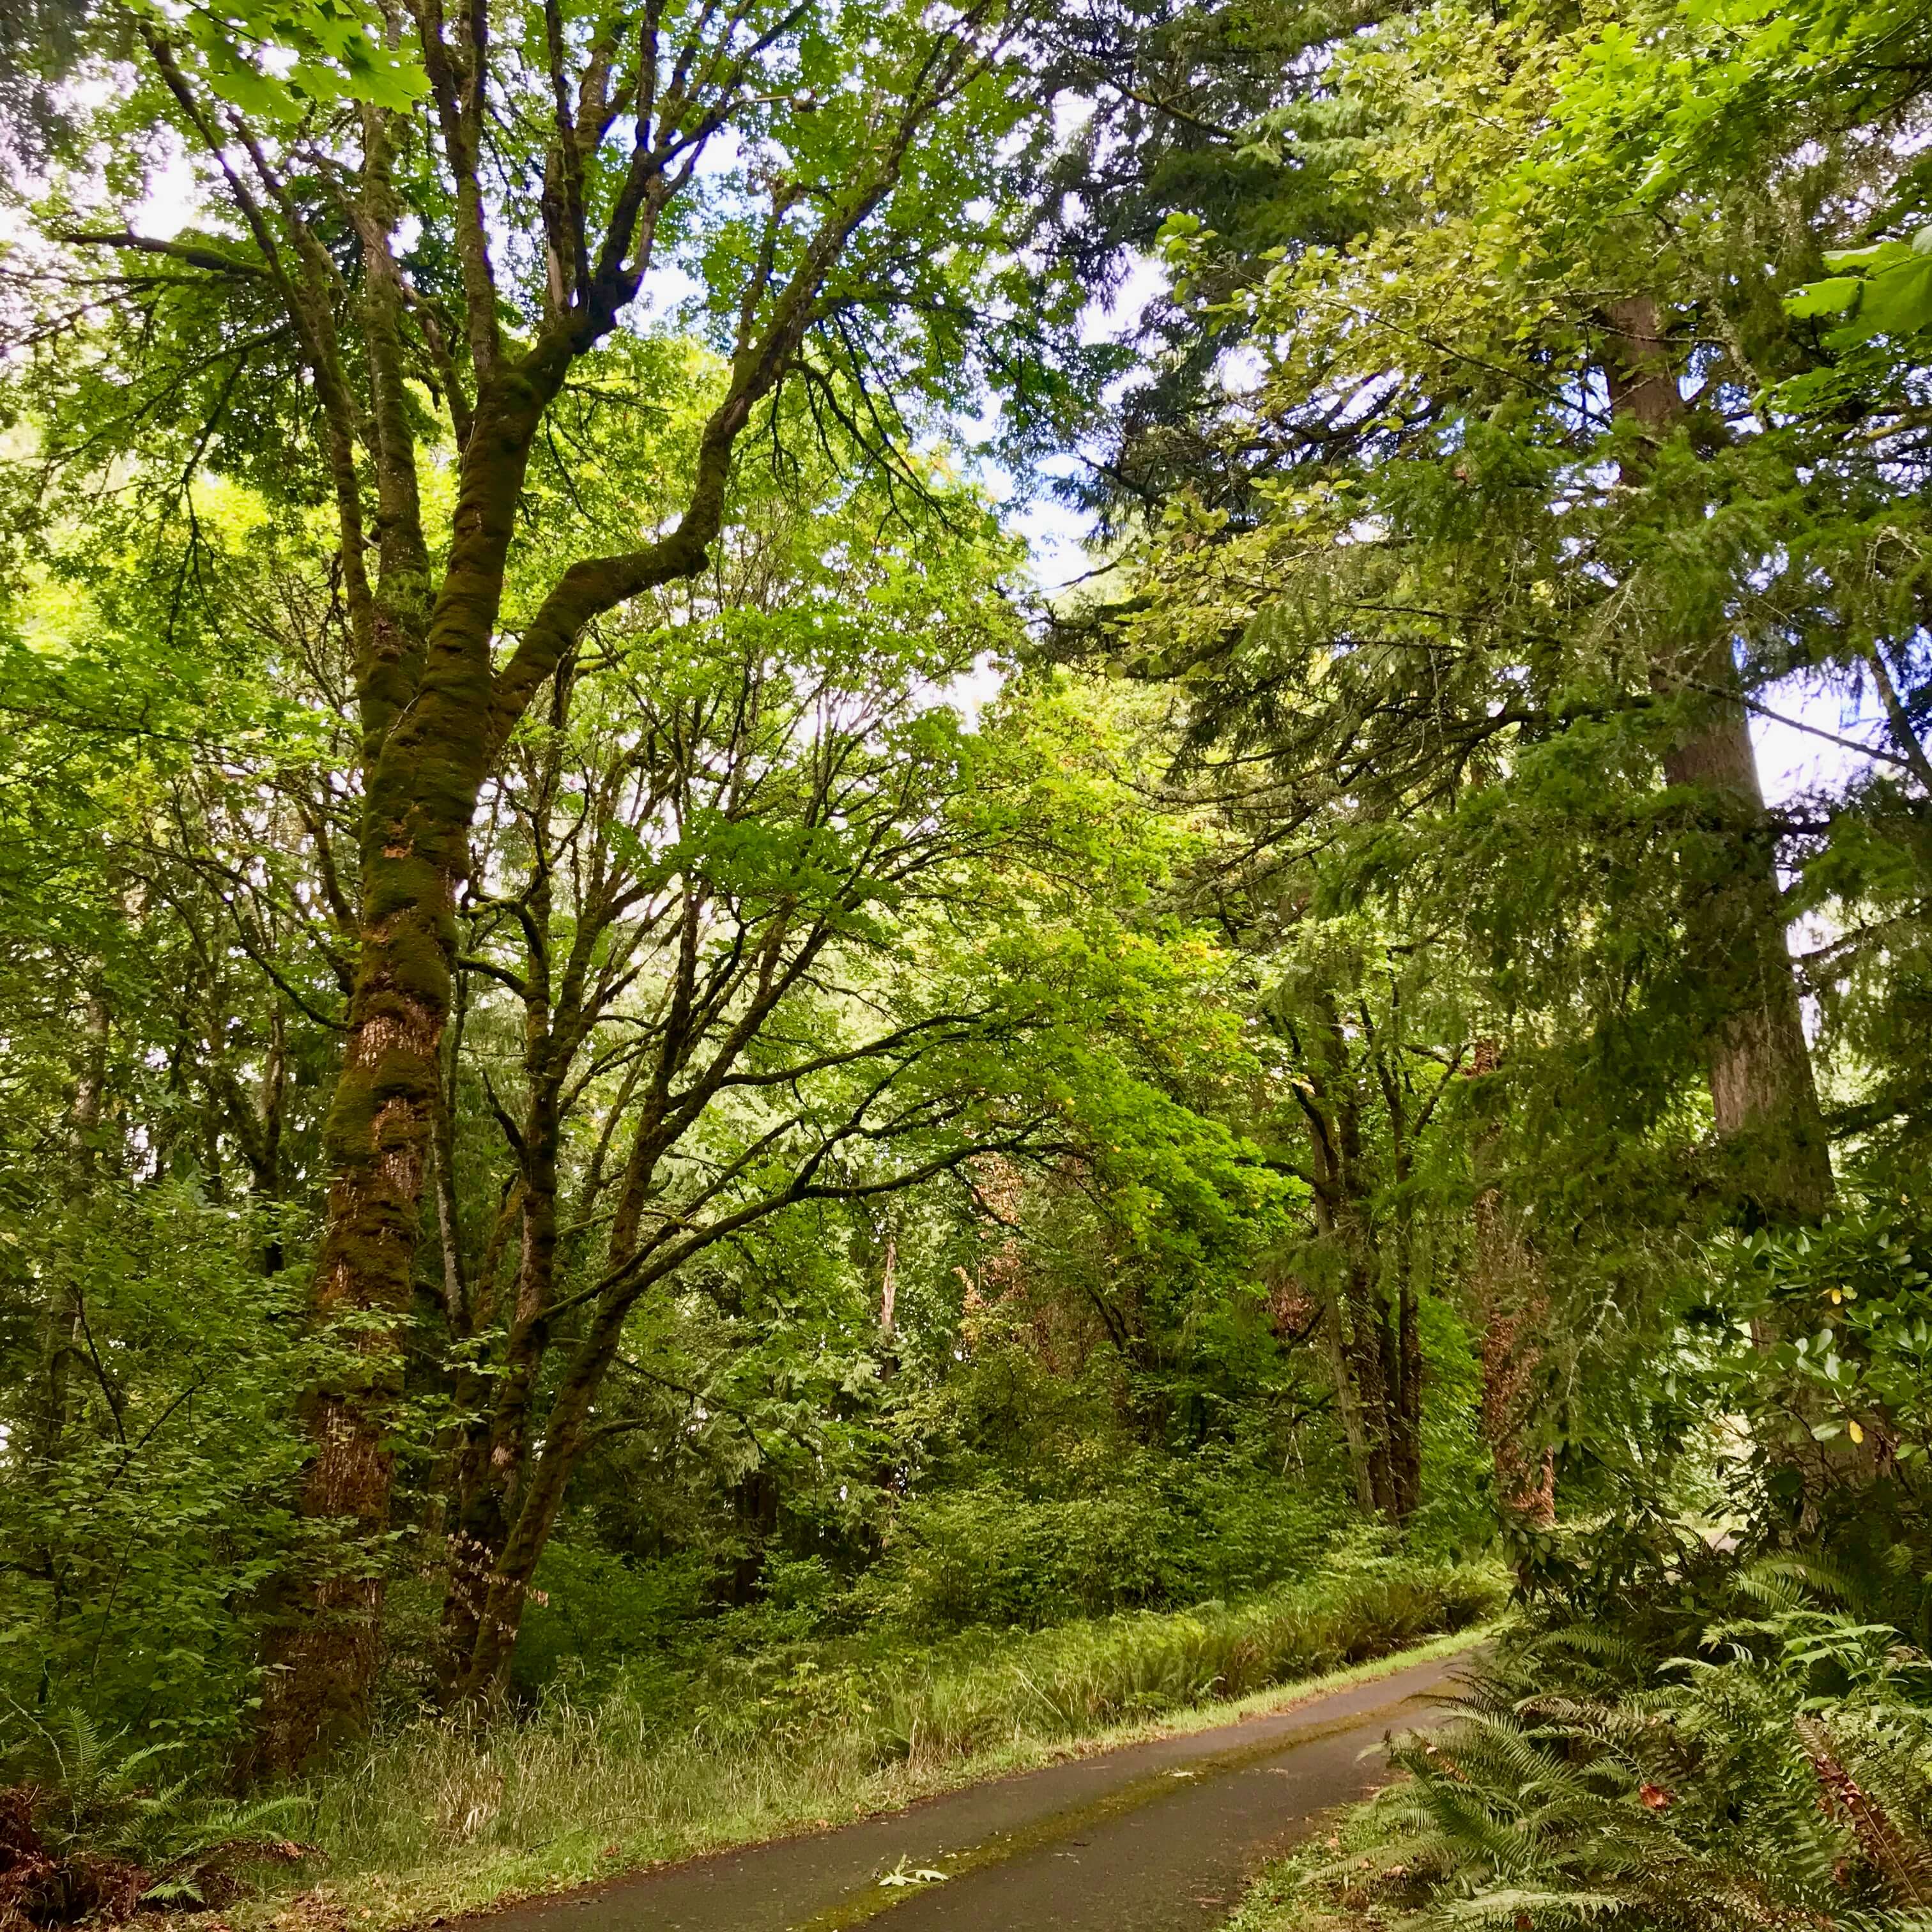 The roadway leading up to my childhood home in Scappoose, Oregon is lined with robust maple and fir trees with hundreds of different shades of green creating a protective canopy.  You can feel the abundance of oxygen.